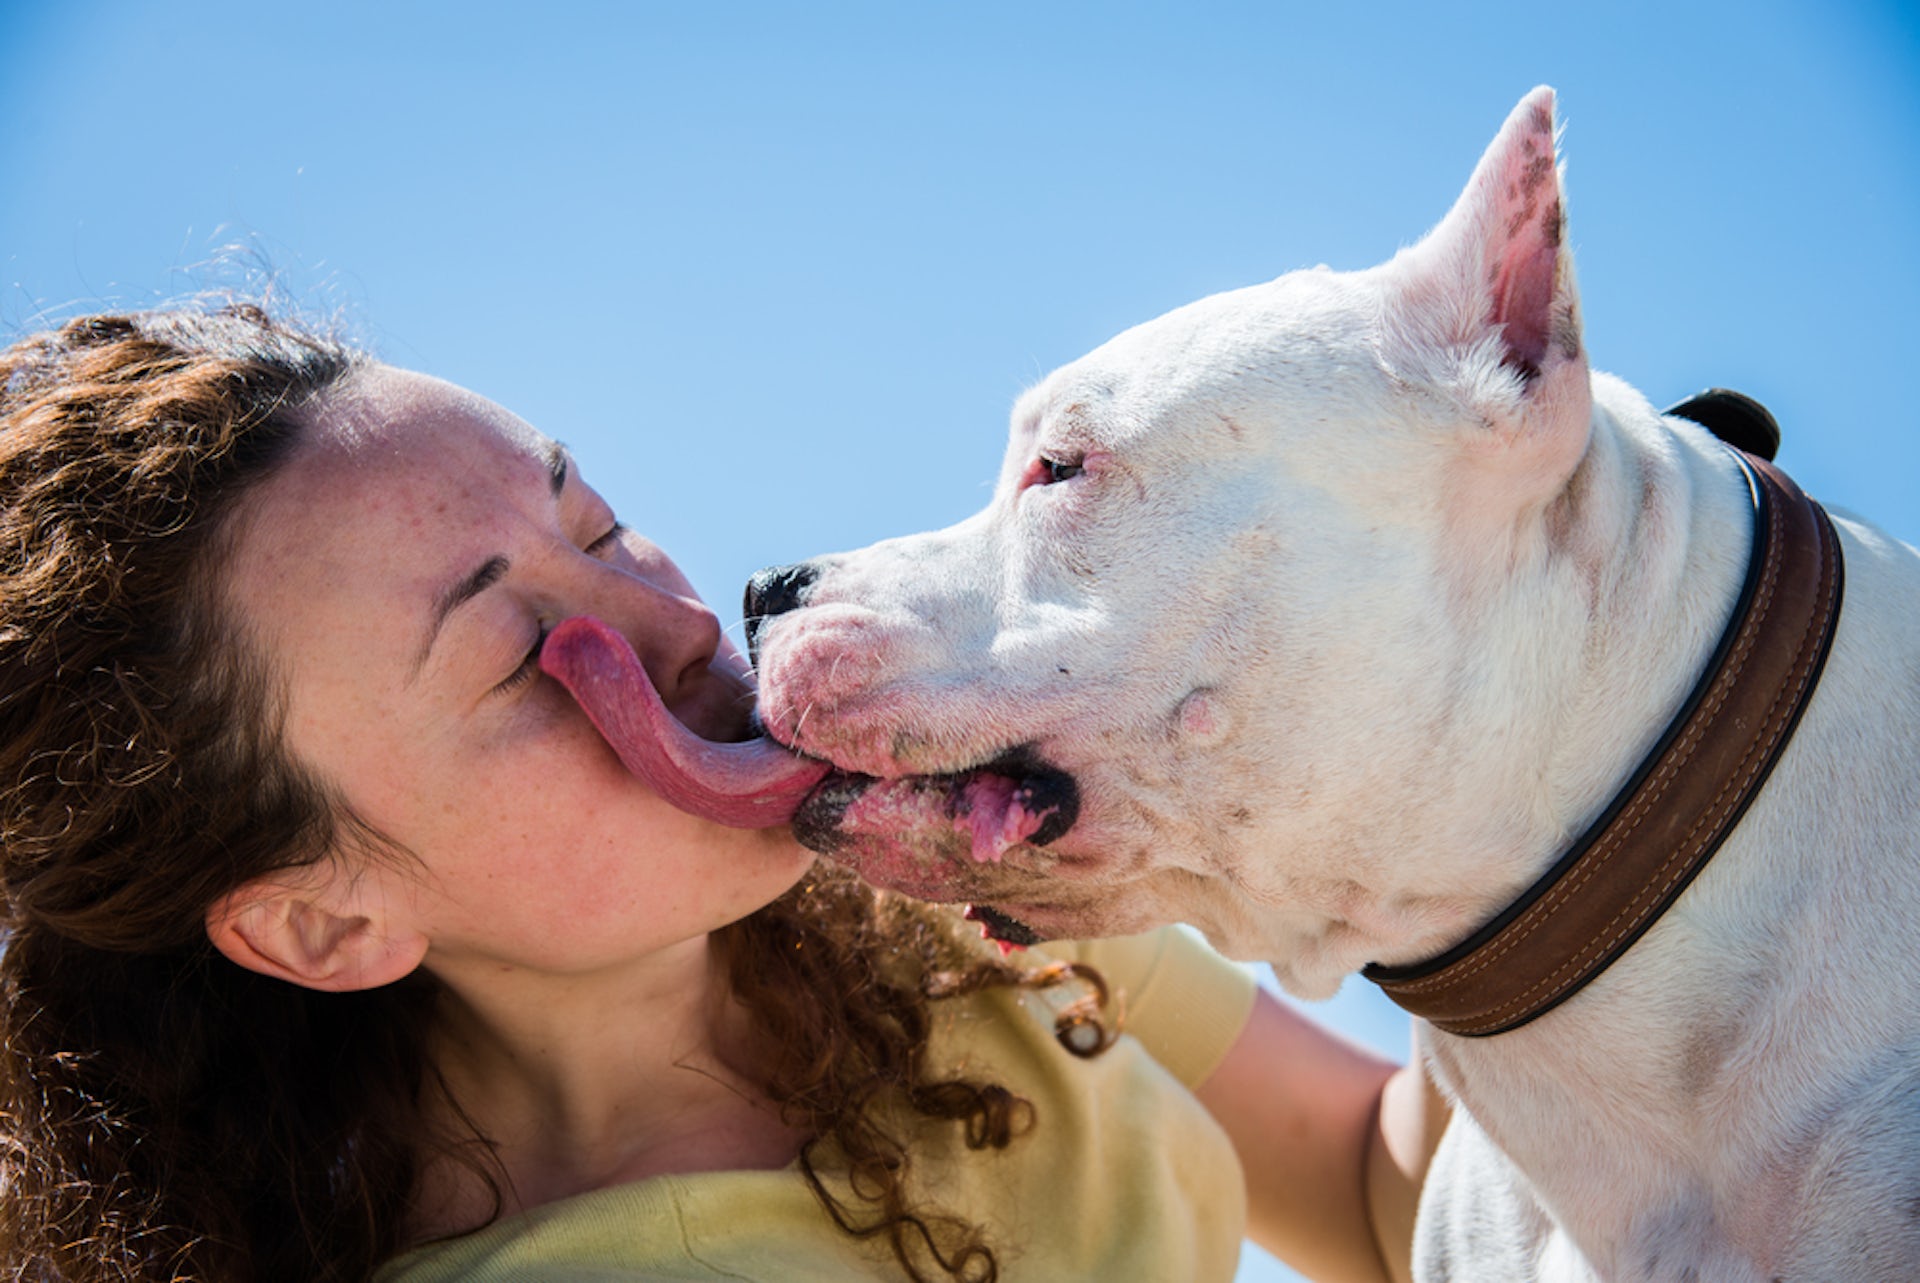 Should you kiss your pet? The risk of animal-borne diseases is minimal, yet present.